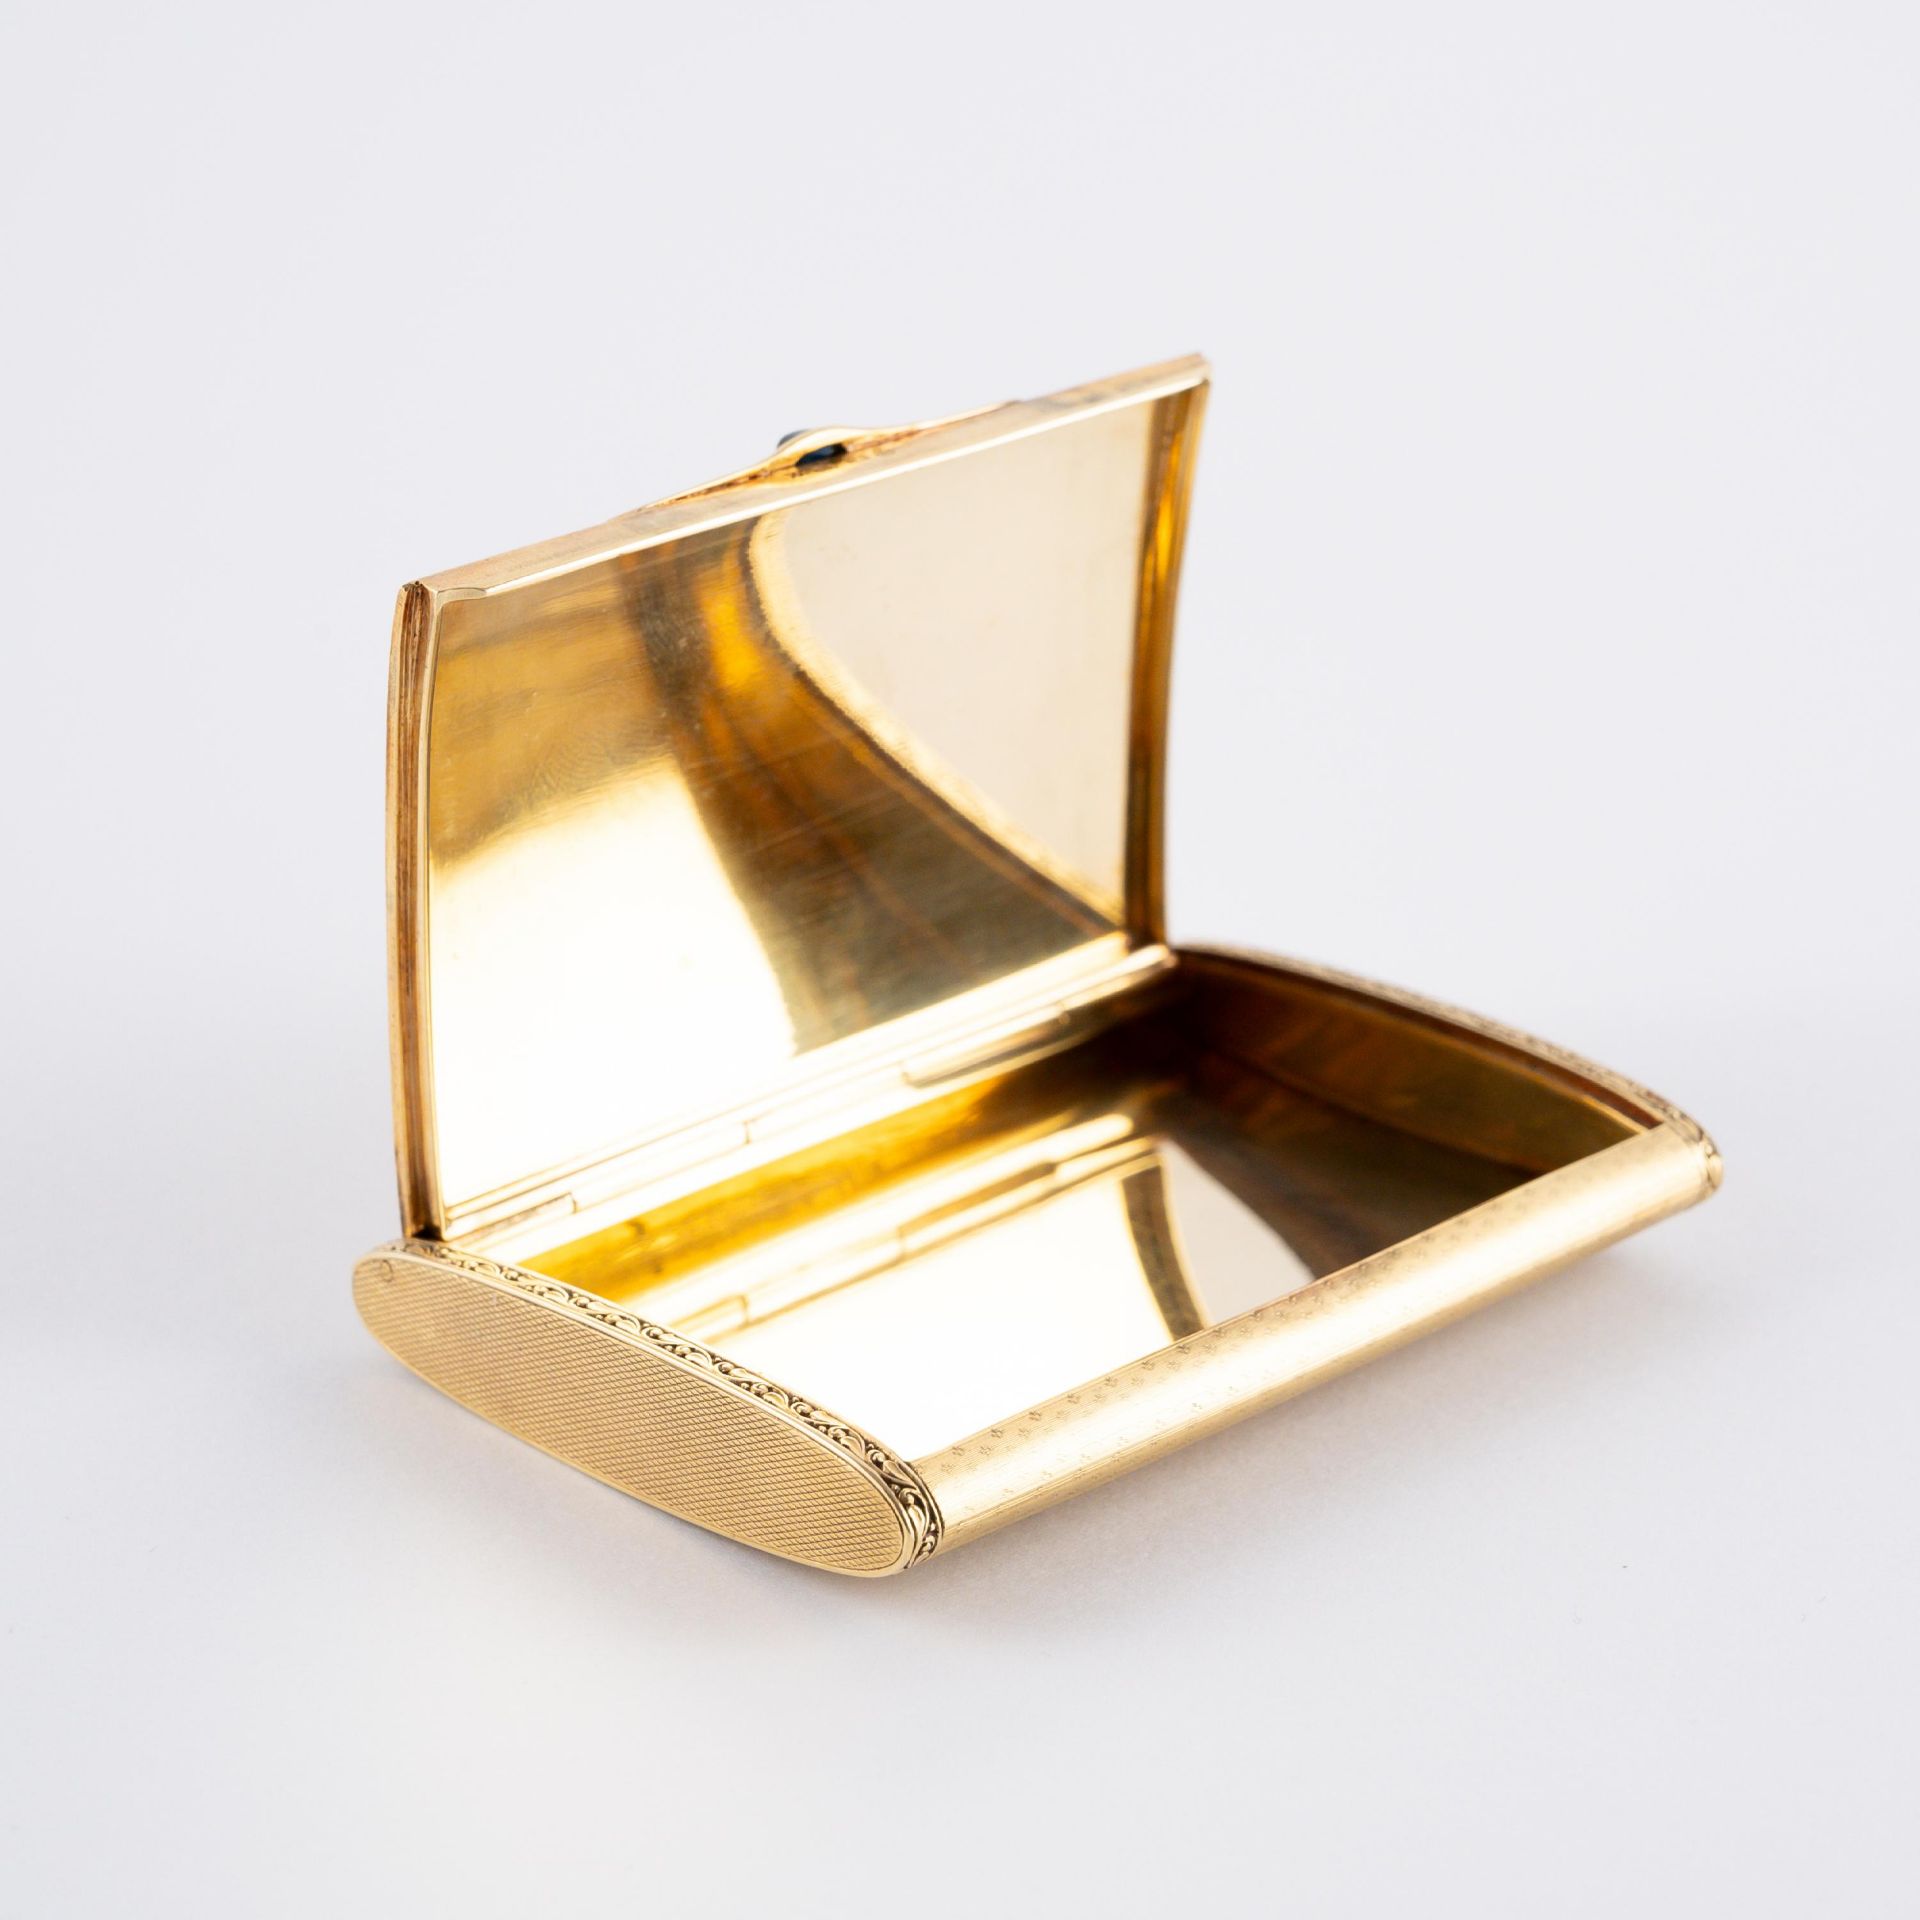 Germany: GOLD ETUI WITH GUILLOCHED SURFACE - Image 5 of 7